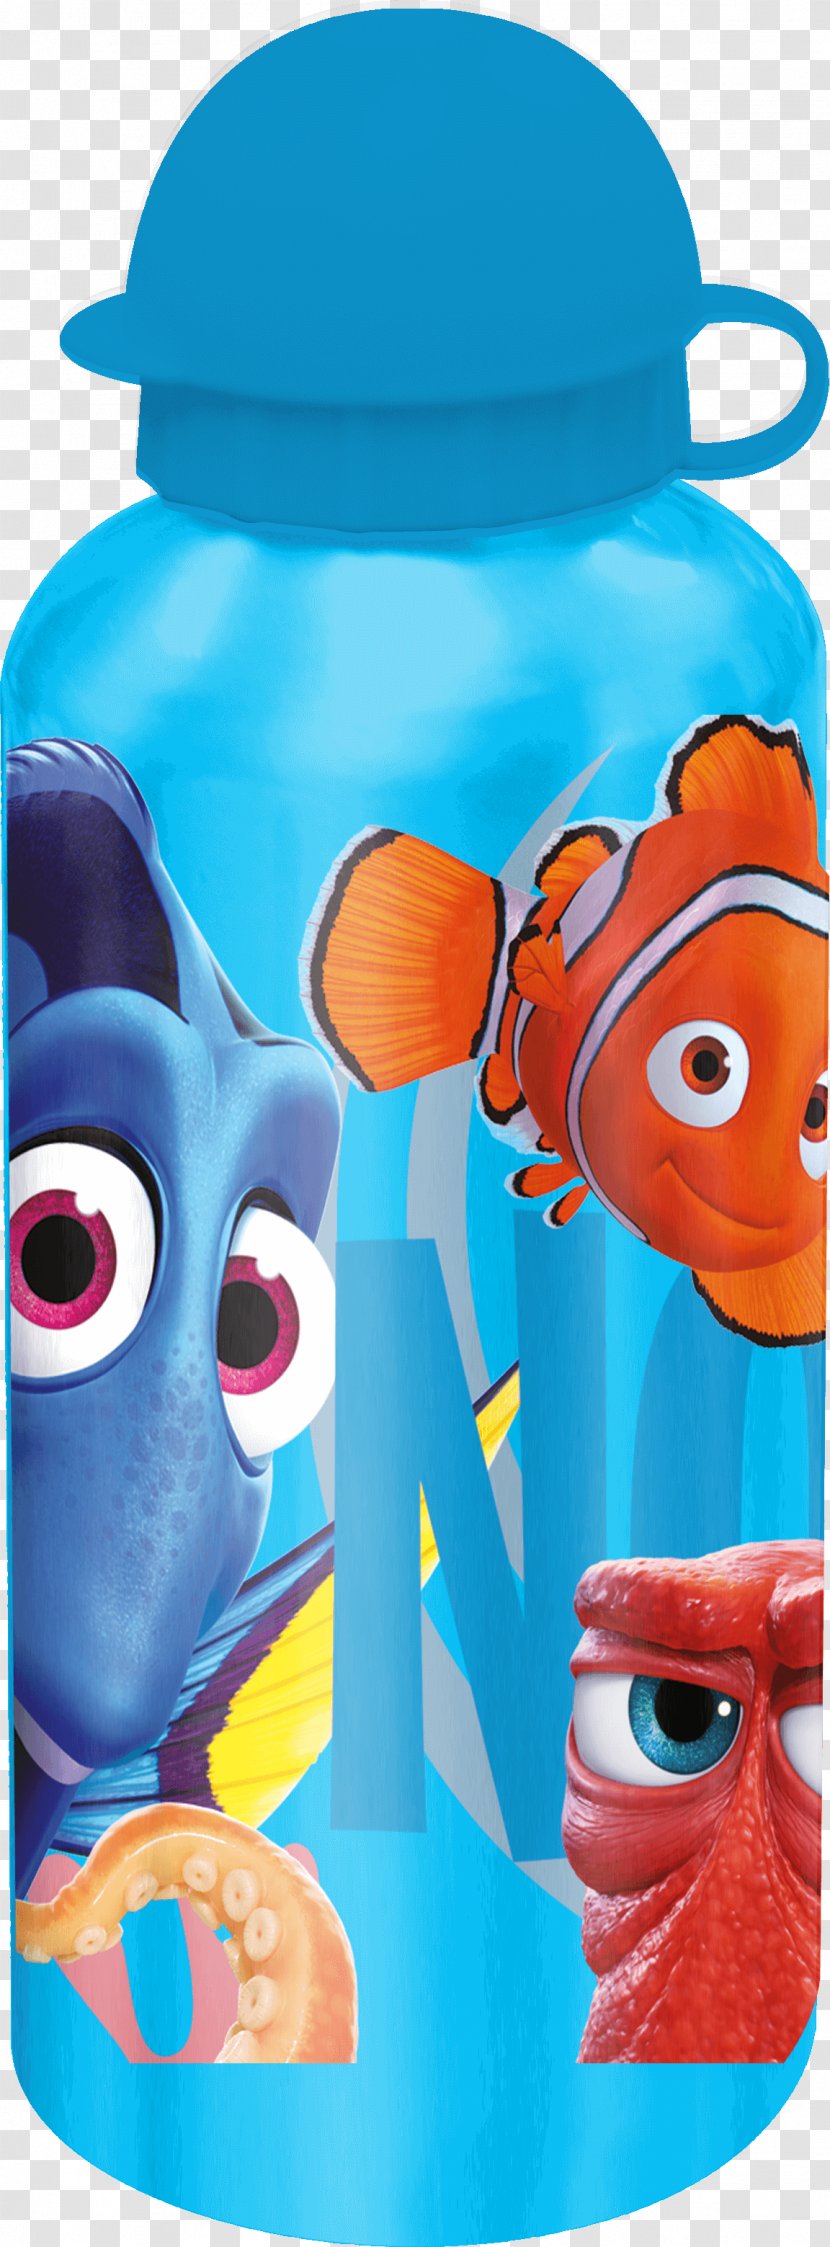 Mickey Mouse Canteen Dory Bottle Minnie - Finding Nemo Transparent PNG